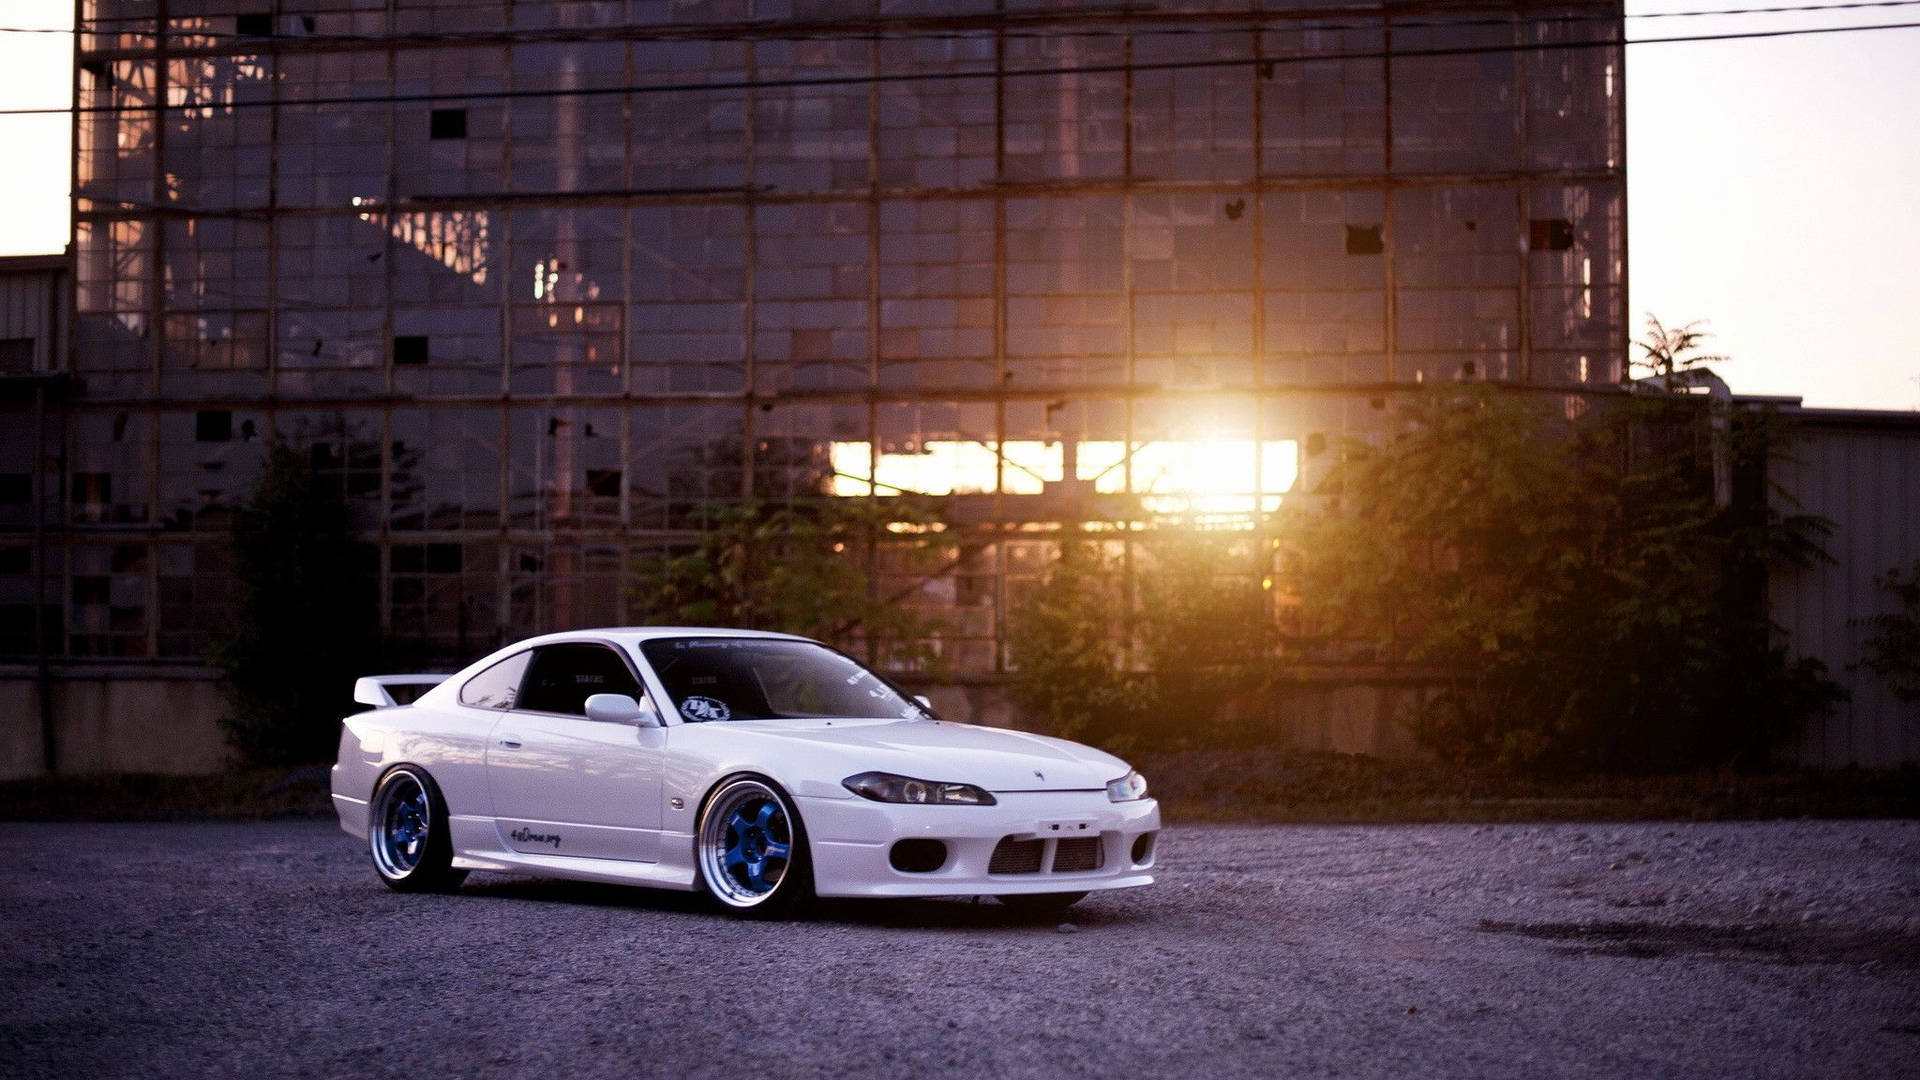 4k Jdm Nissan Silvia In Construction Site Background